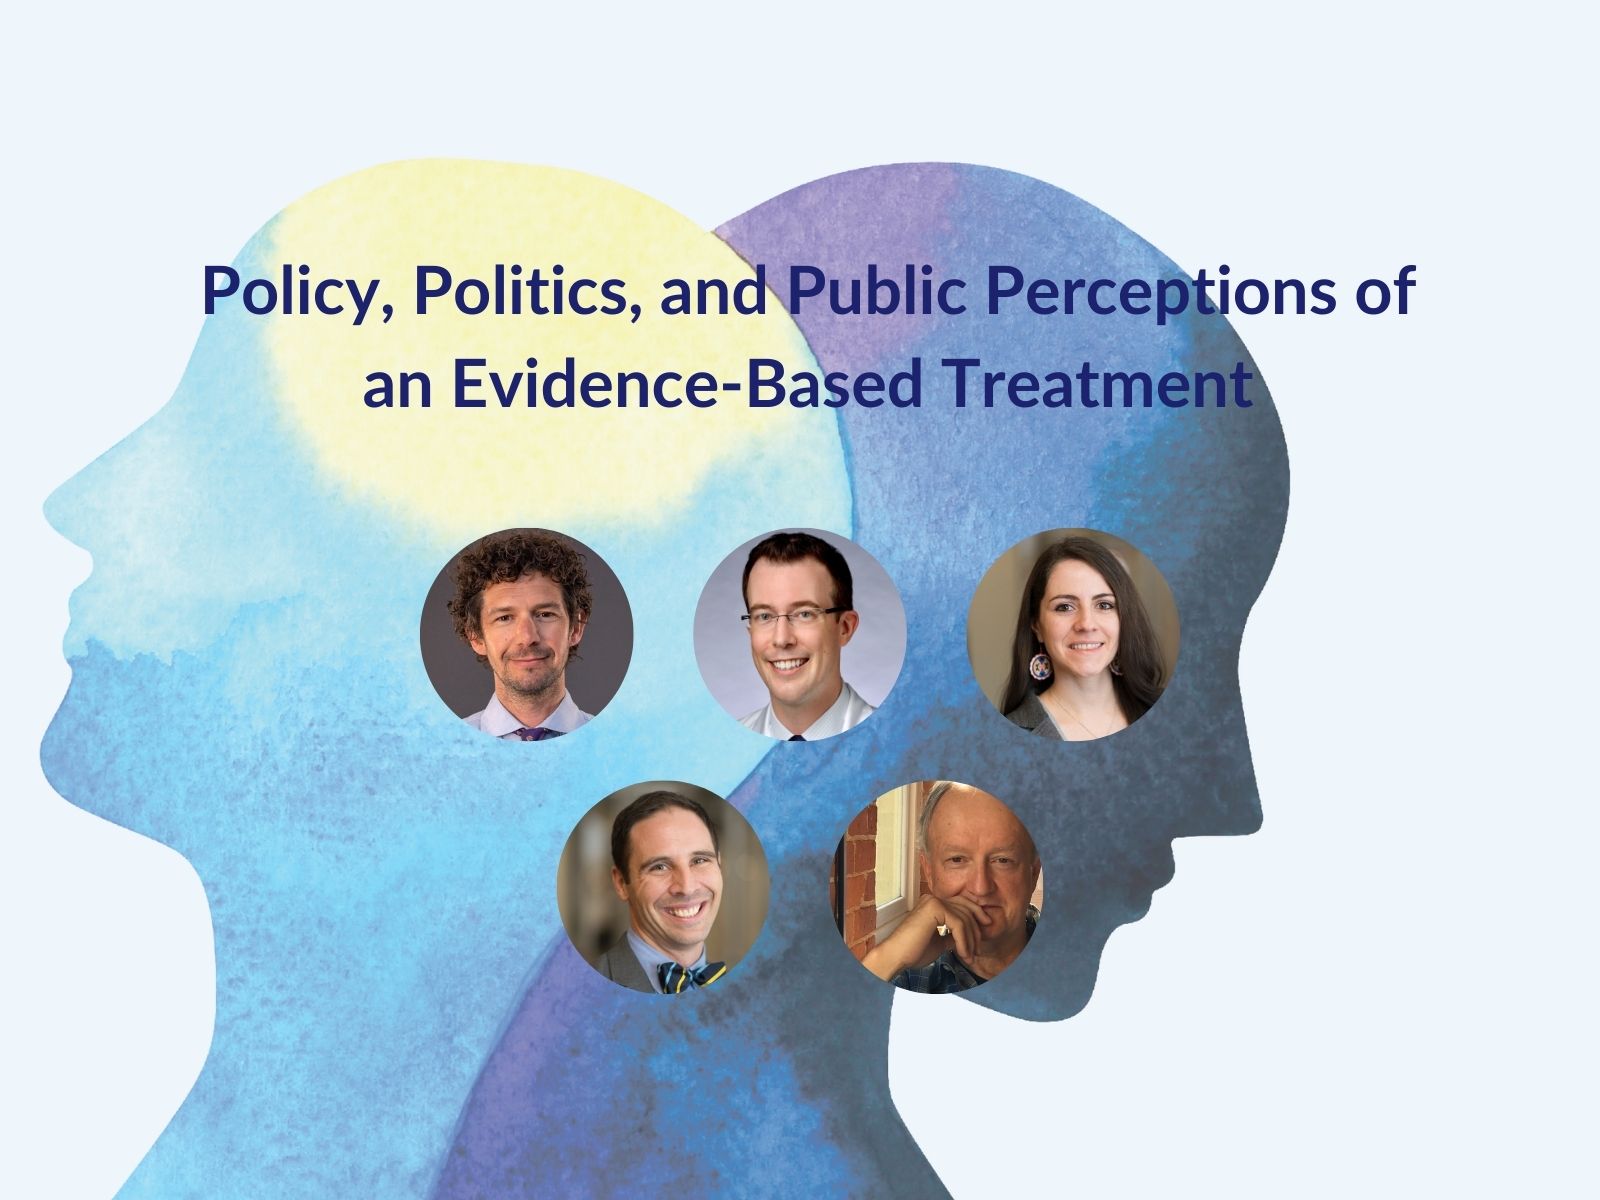 Title of the first panel is Policy, Politics, and Public Perceptions of an Evidence-Based Treatment.